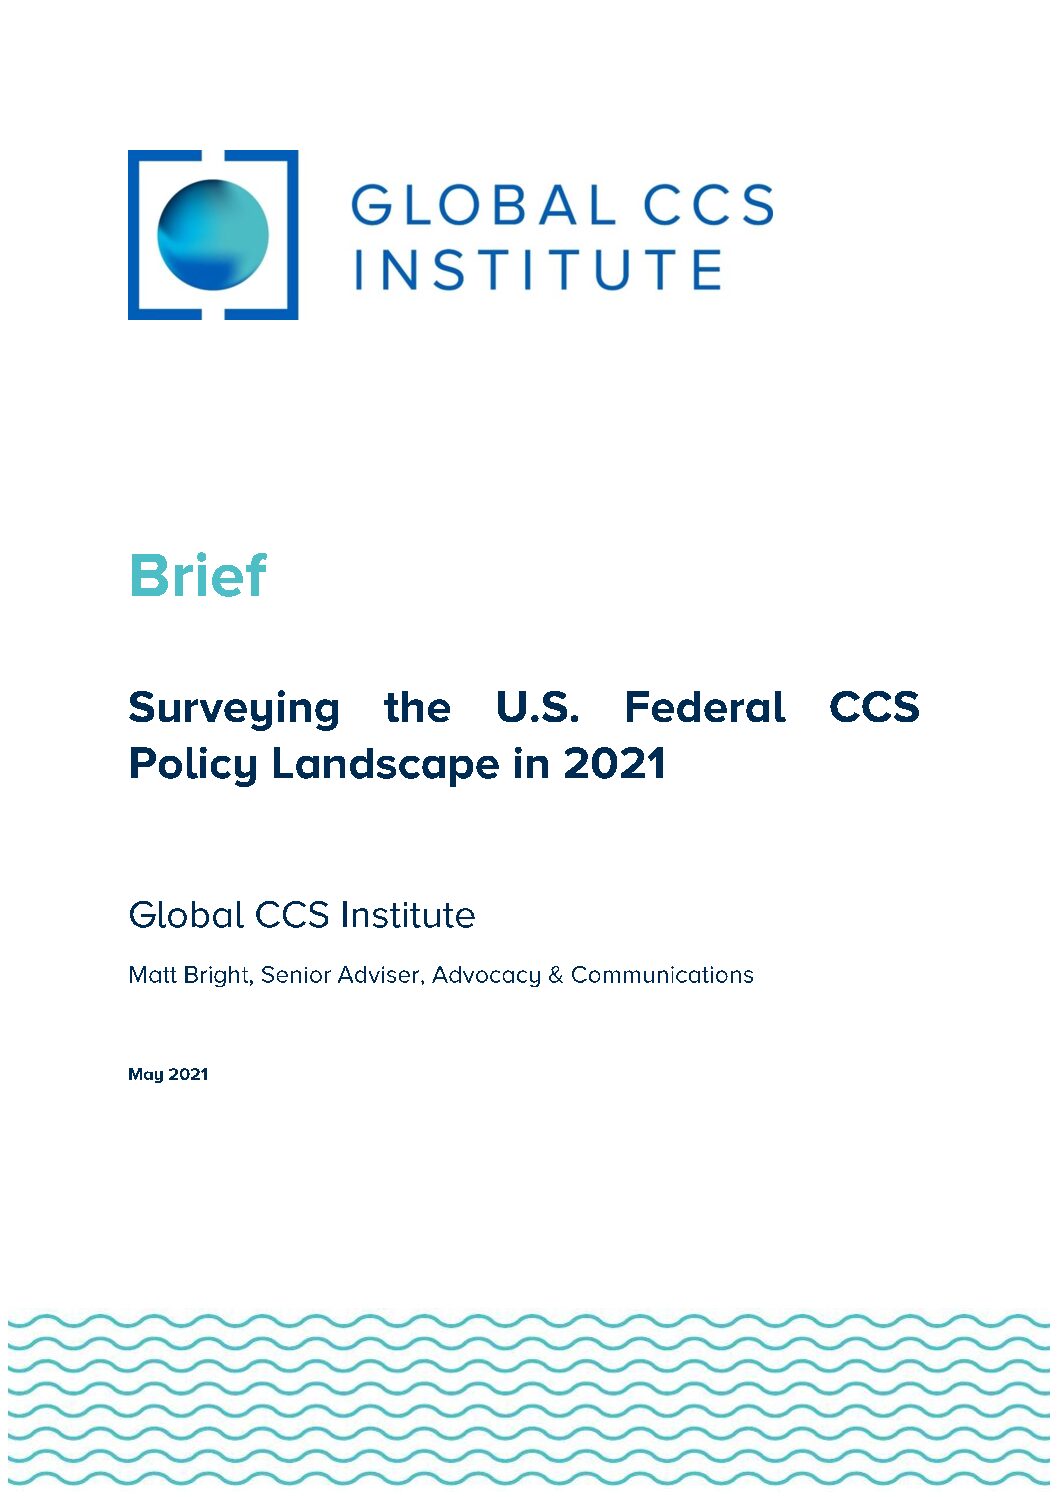 Surveying the U.S. Federal CCS Policy Landscape in 2021